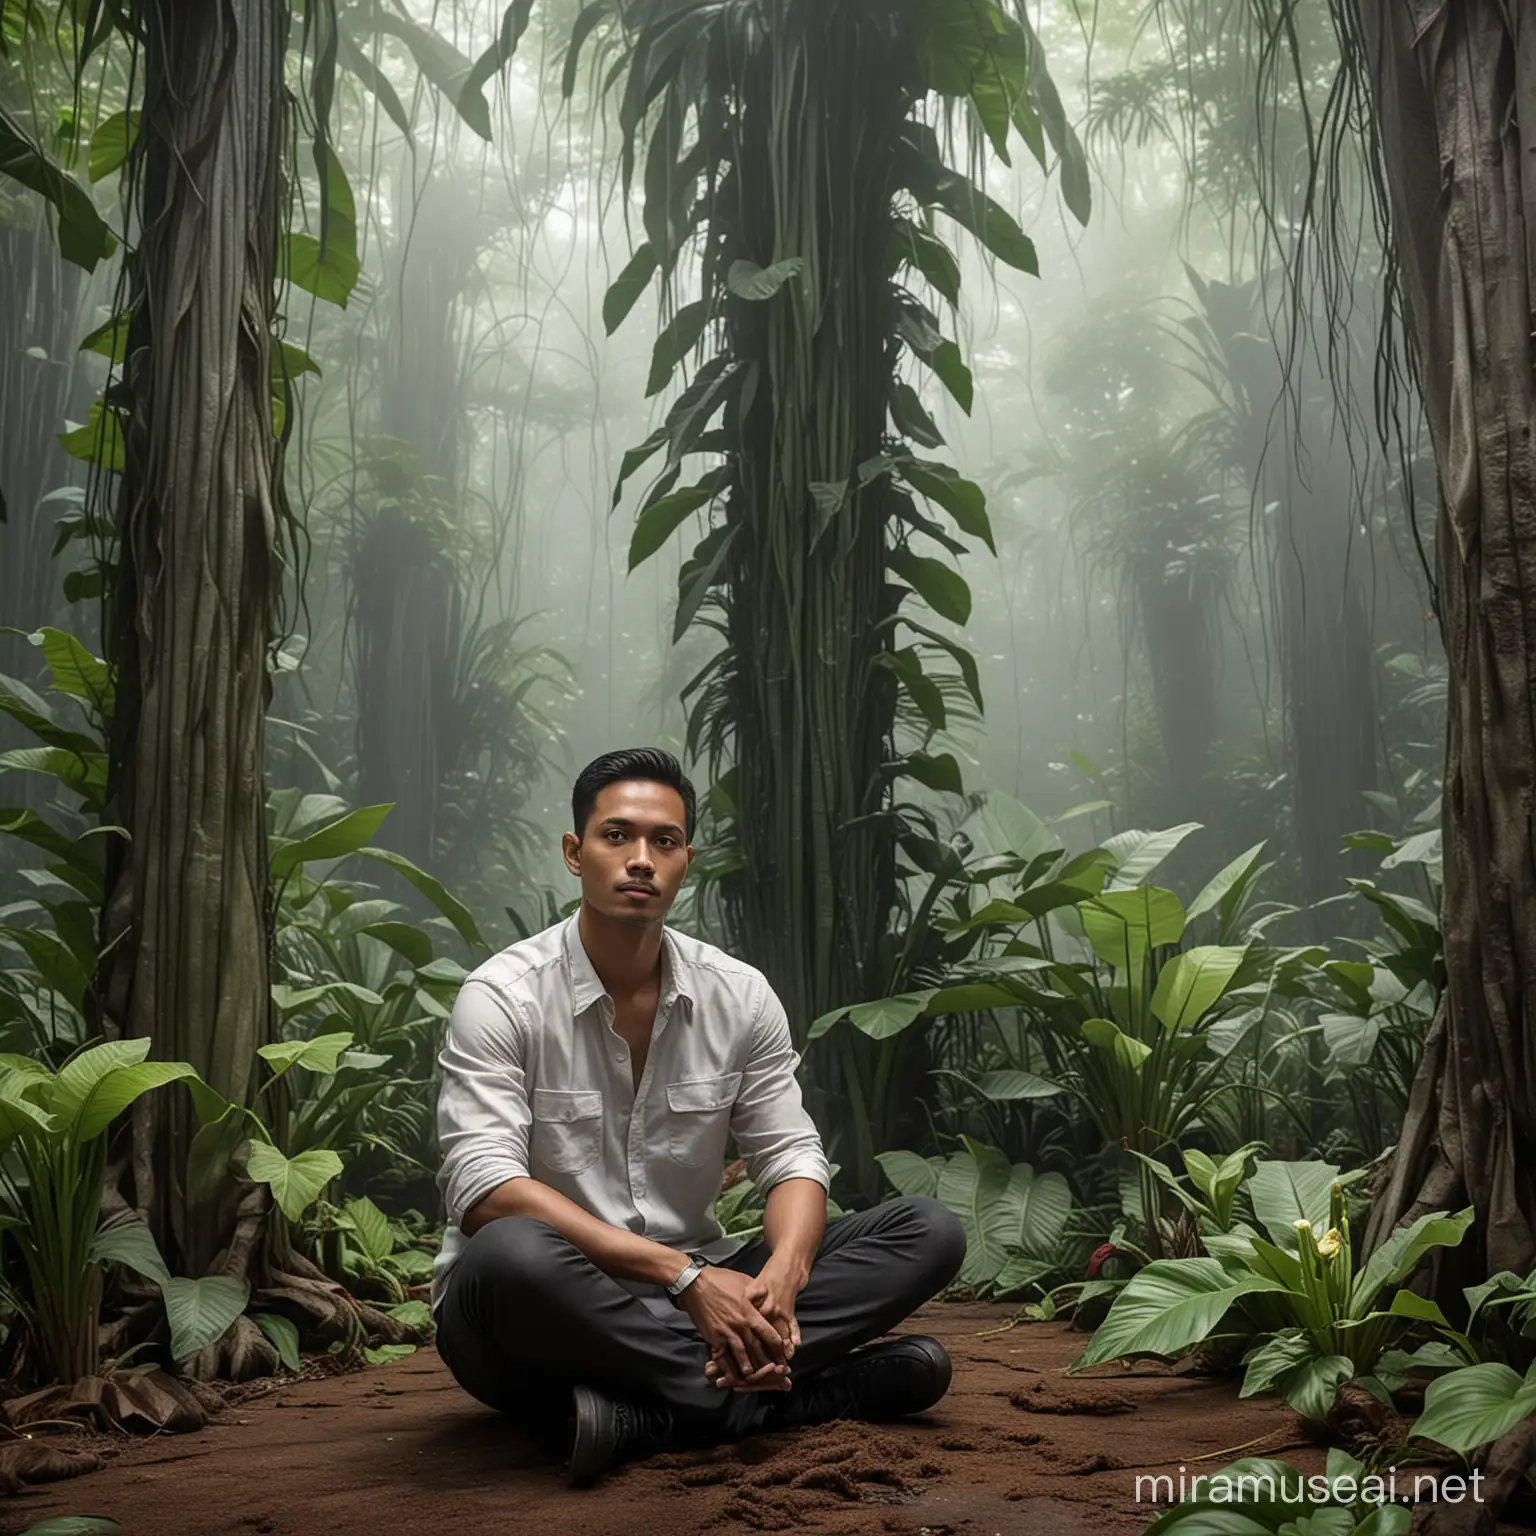 Realistic photoshop of a handsome Indonesian man sitting cross-legged facing the corpse flower that will bloom in the Cibodas Botanical Gardens as the background for the blooming corpse flower.